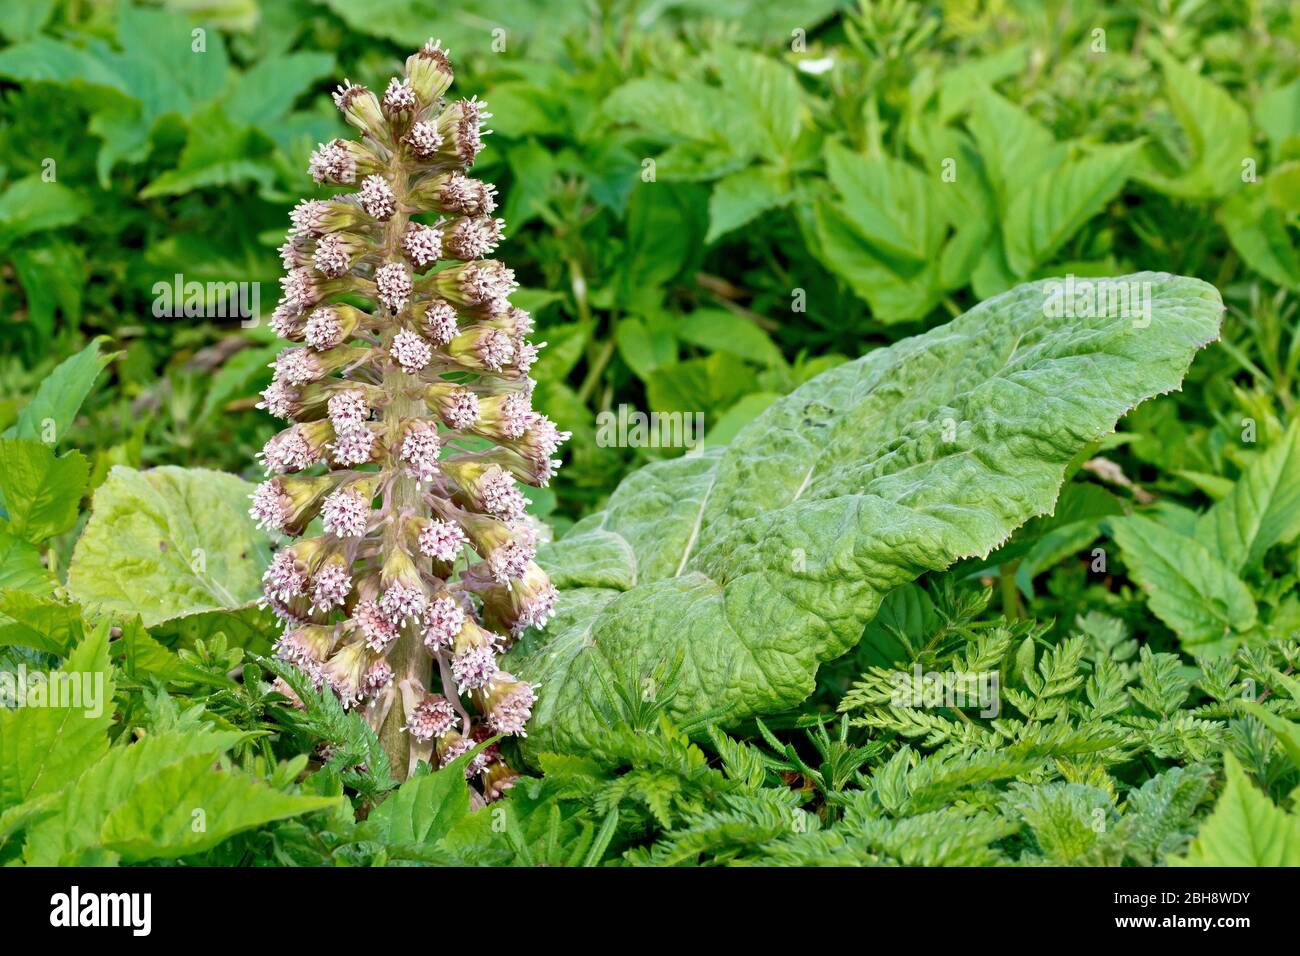 Butterbur (petasites hybridus), close up of a spike of male flowers growing up through the vegetation along with one of the large leaves the plant pro Stock Photo